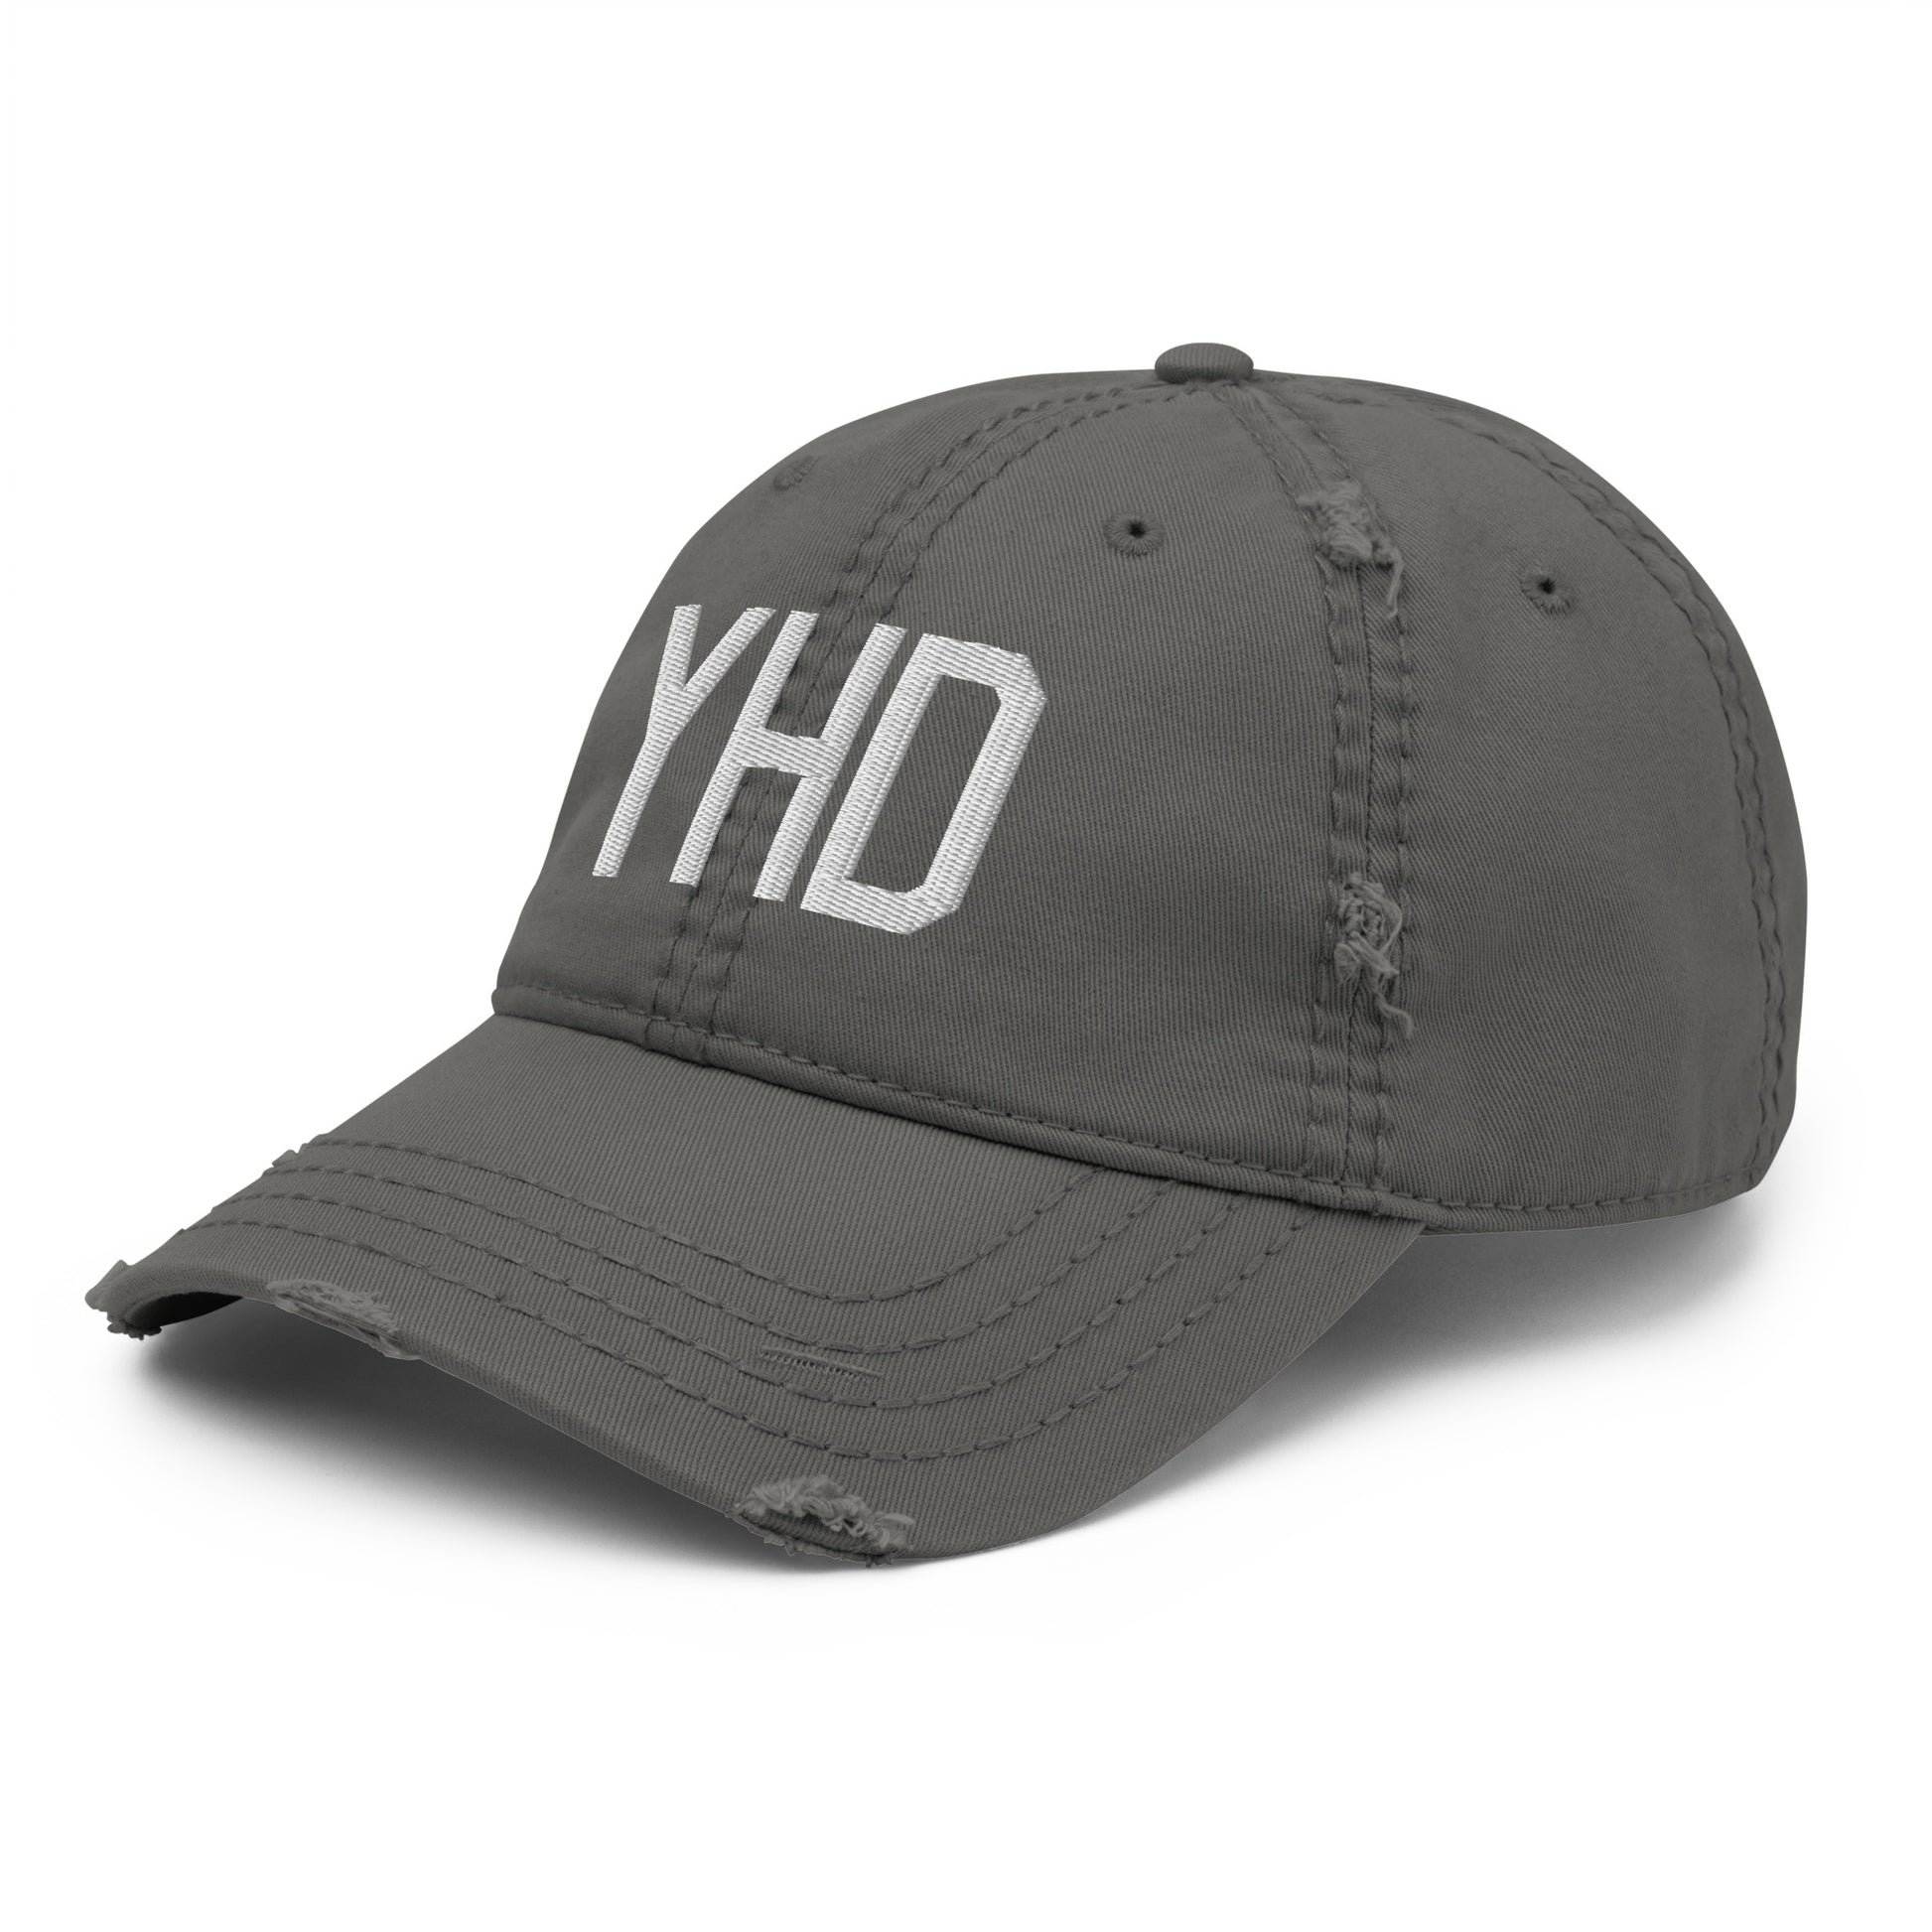 Airport Code Distressed Hat - White • YHD Dryden • YHM Designs - Image 16